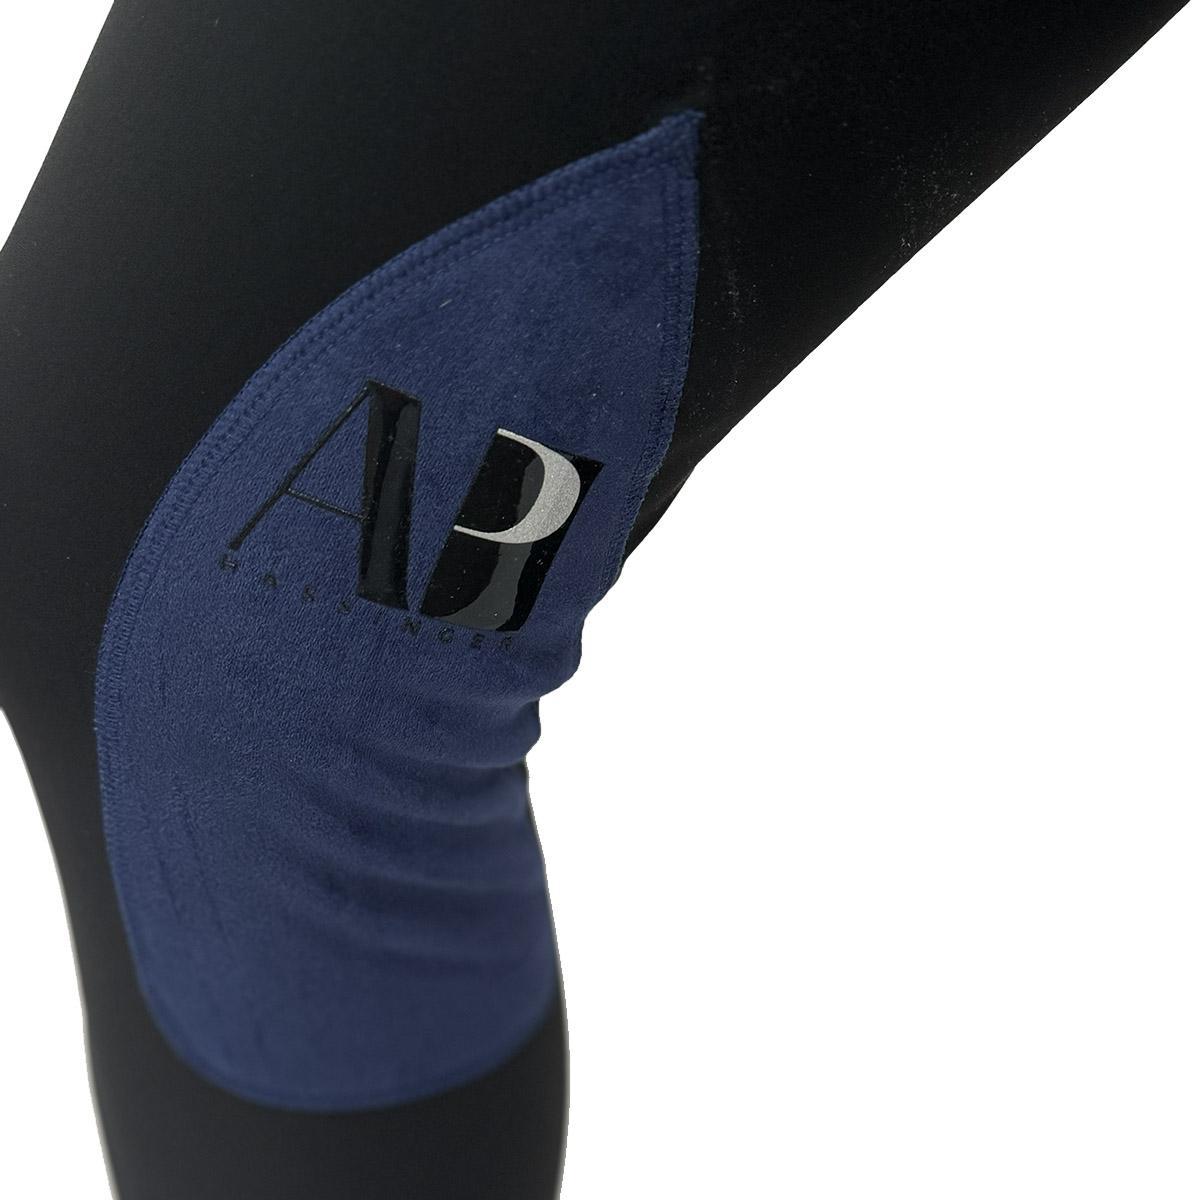 AP Hassinger Night Moves Knee Patch Breeches